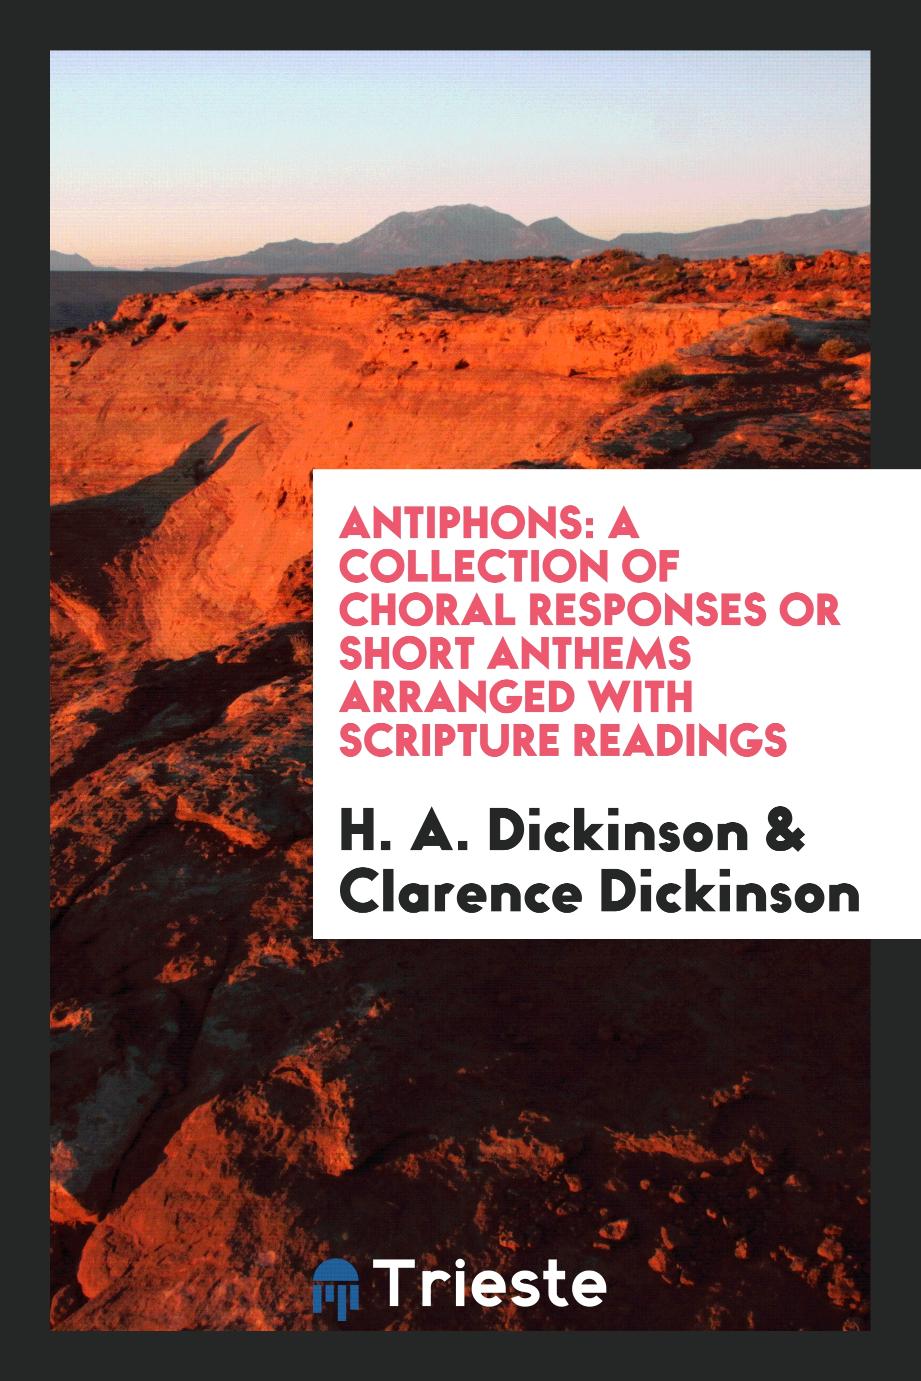 Antiphons: A Collection of Choral Responses Or Short Anthems Arranged with Scripture Readings